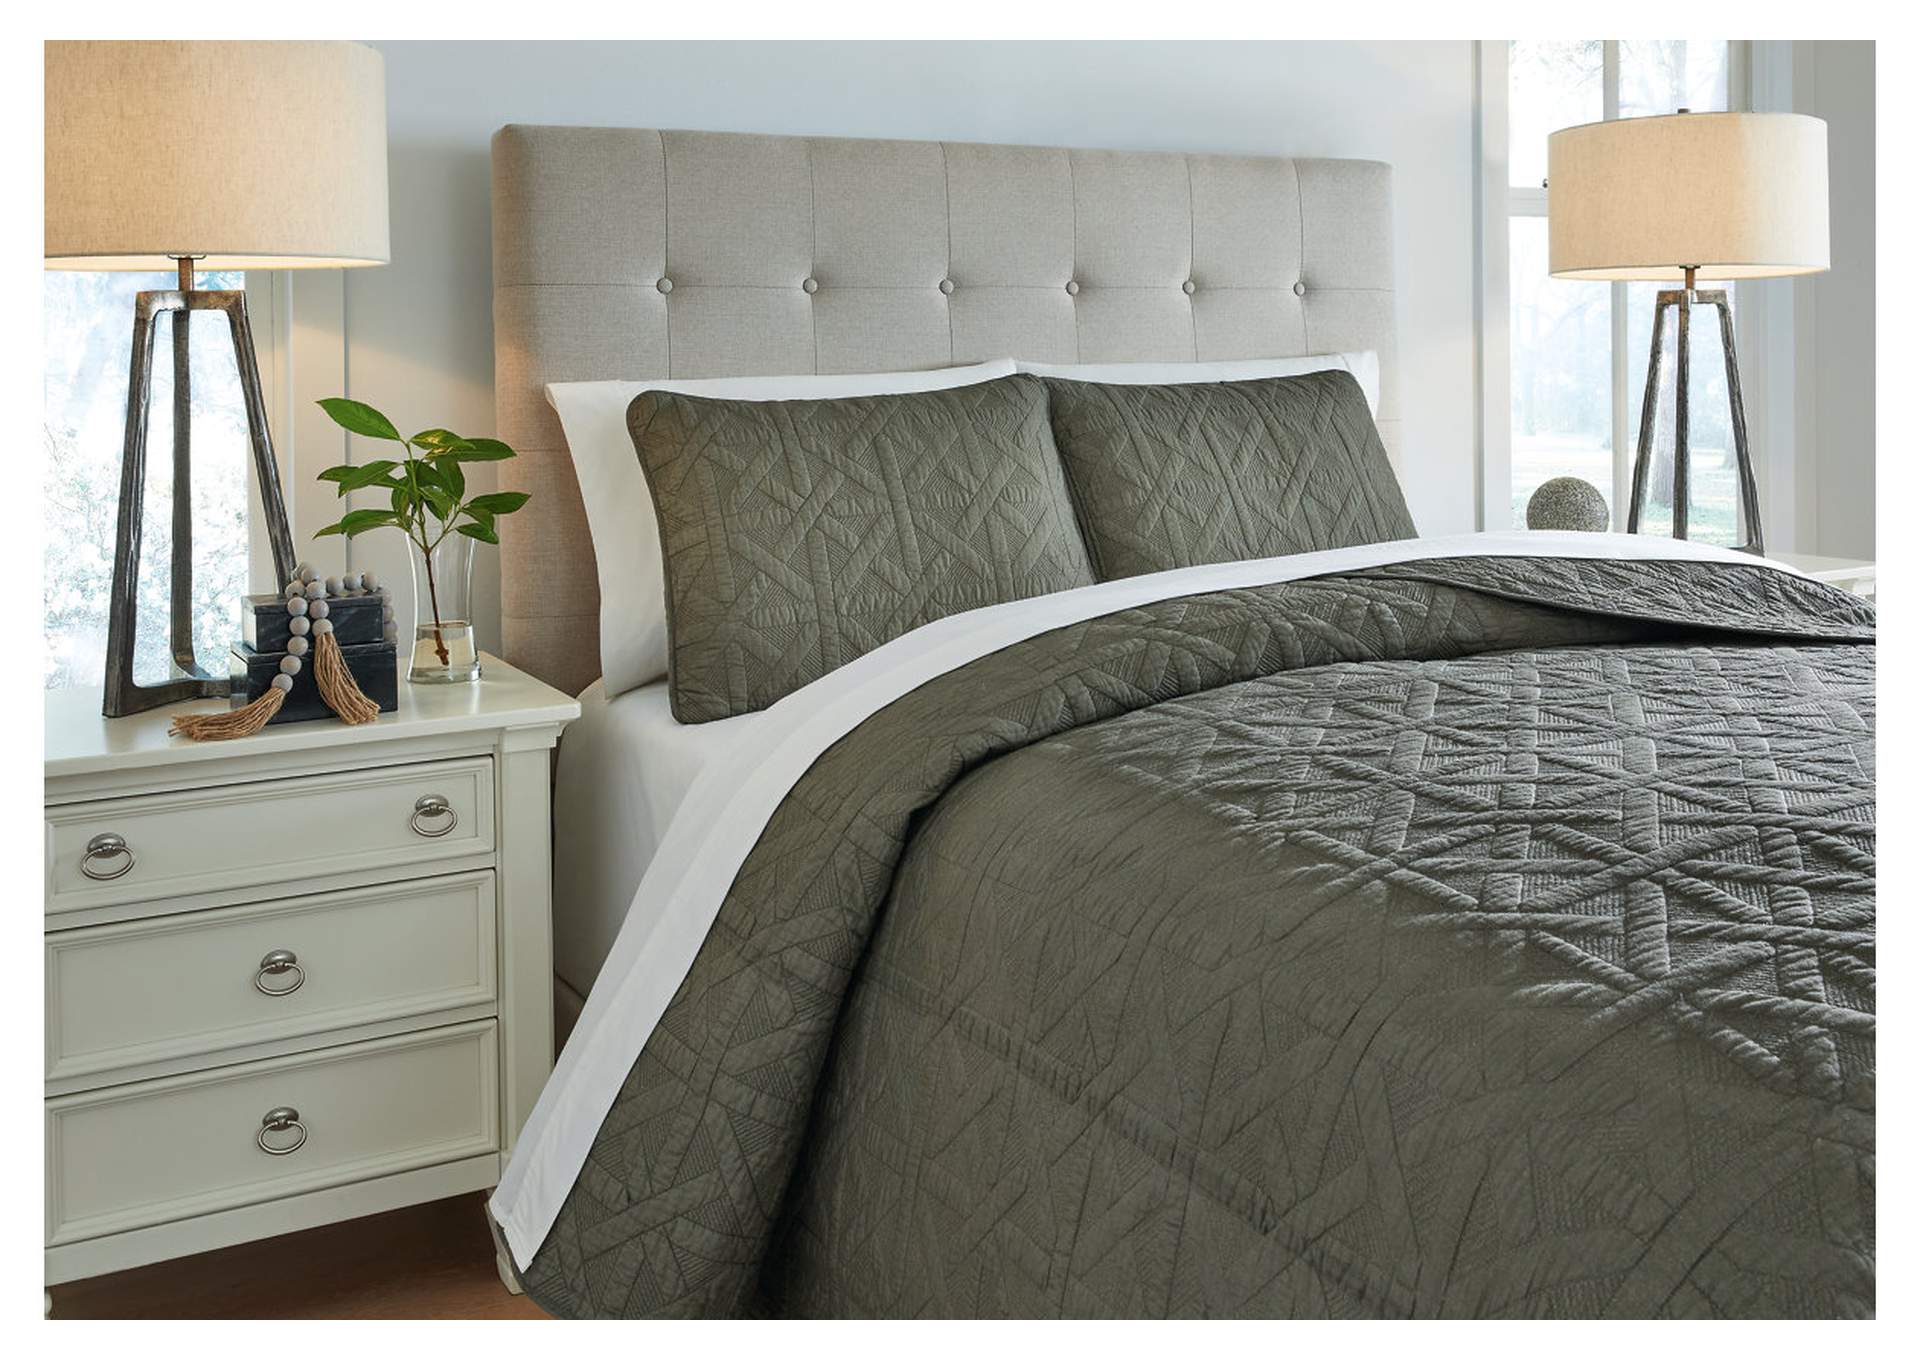 Guslea Queen Coverlet Set,Signature Design By Ashley